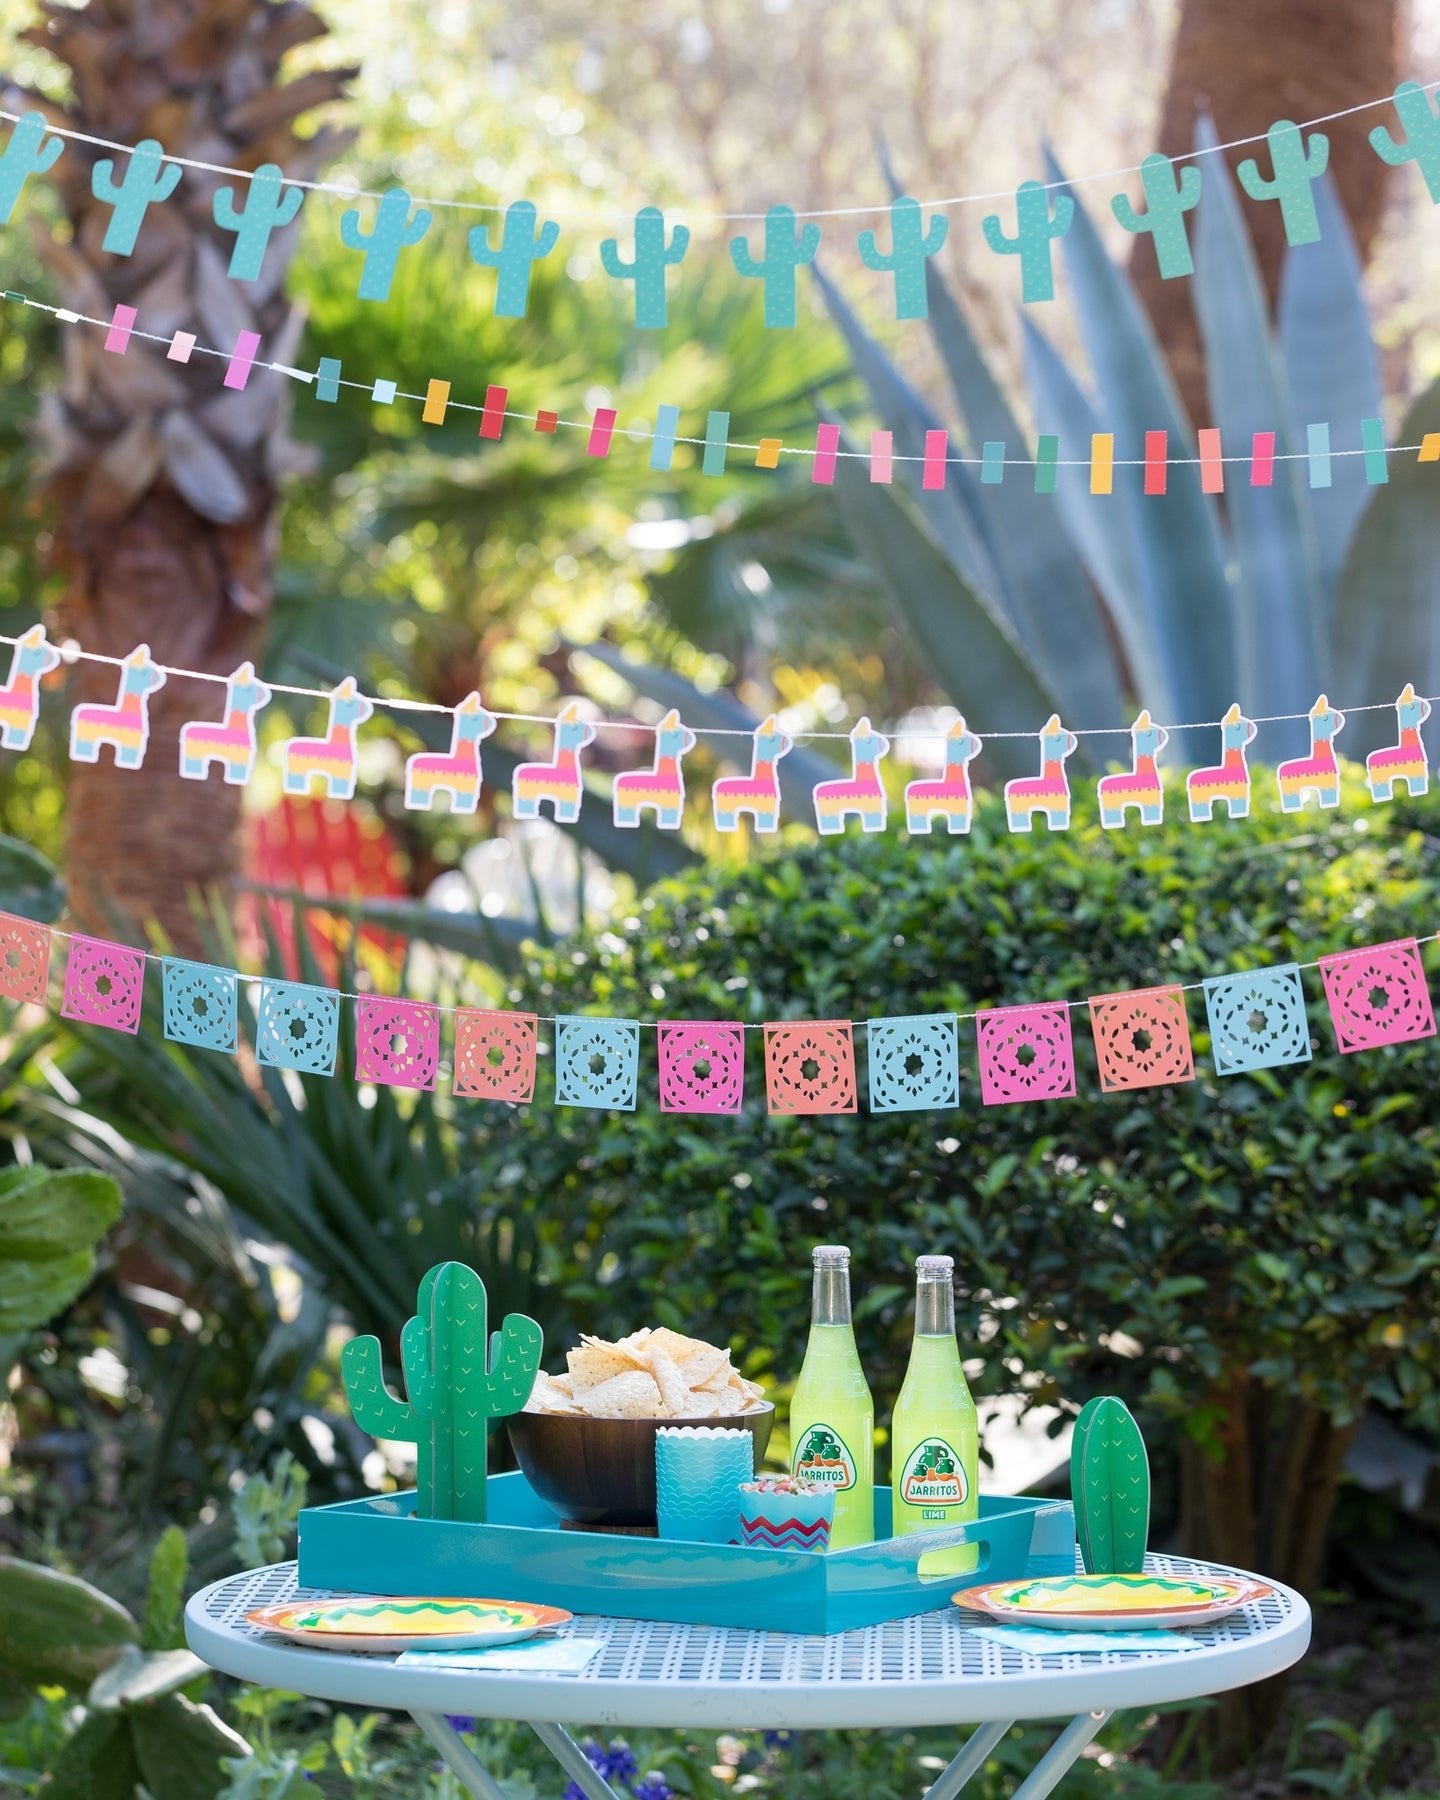 Cactus Banner - Oh My Darling Party Co-bannerbannerscacti #Fringe_Backdrop#